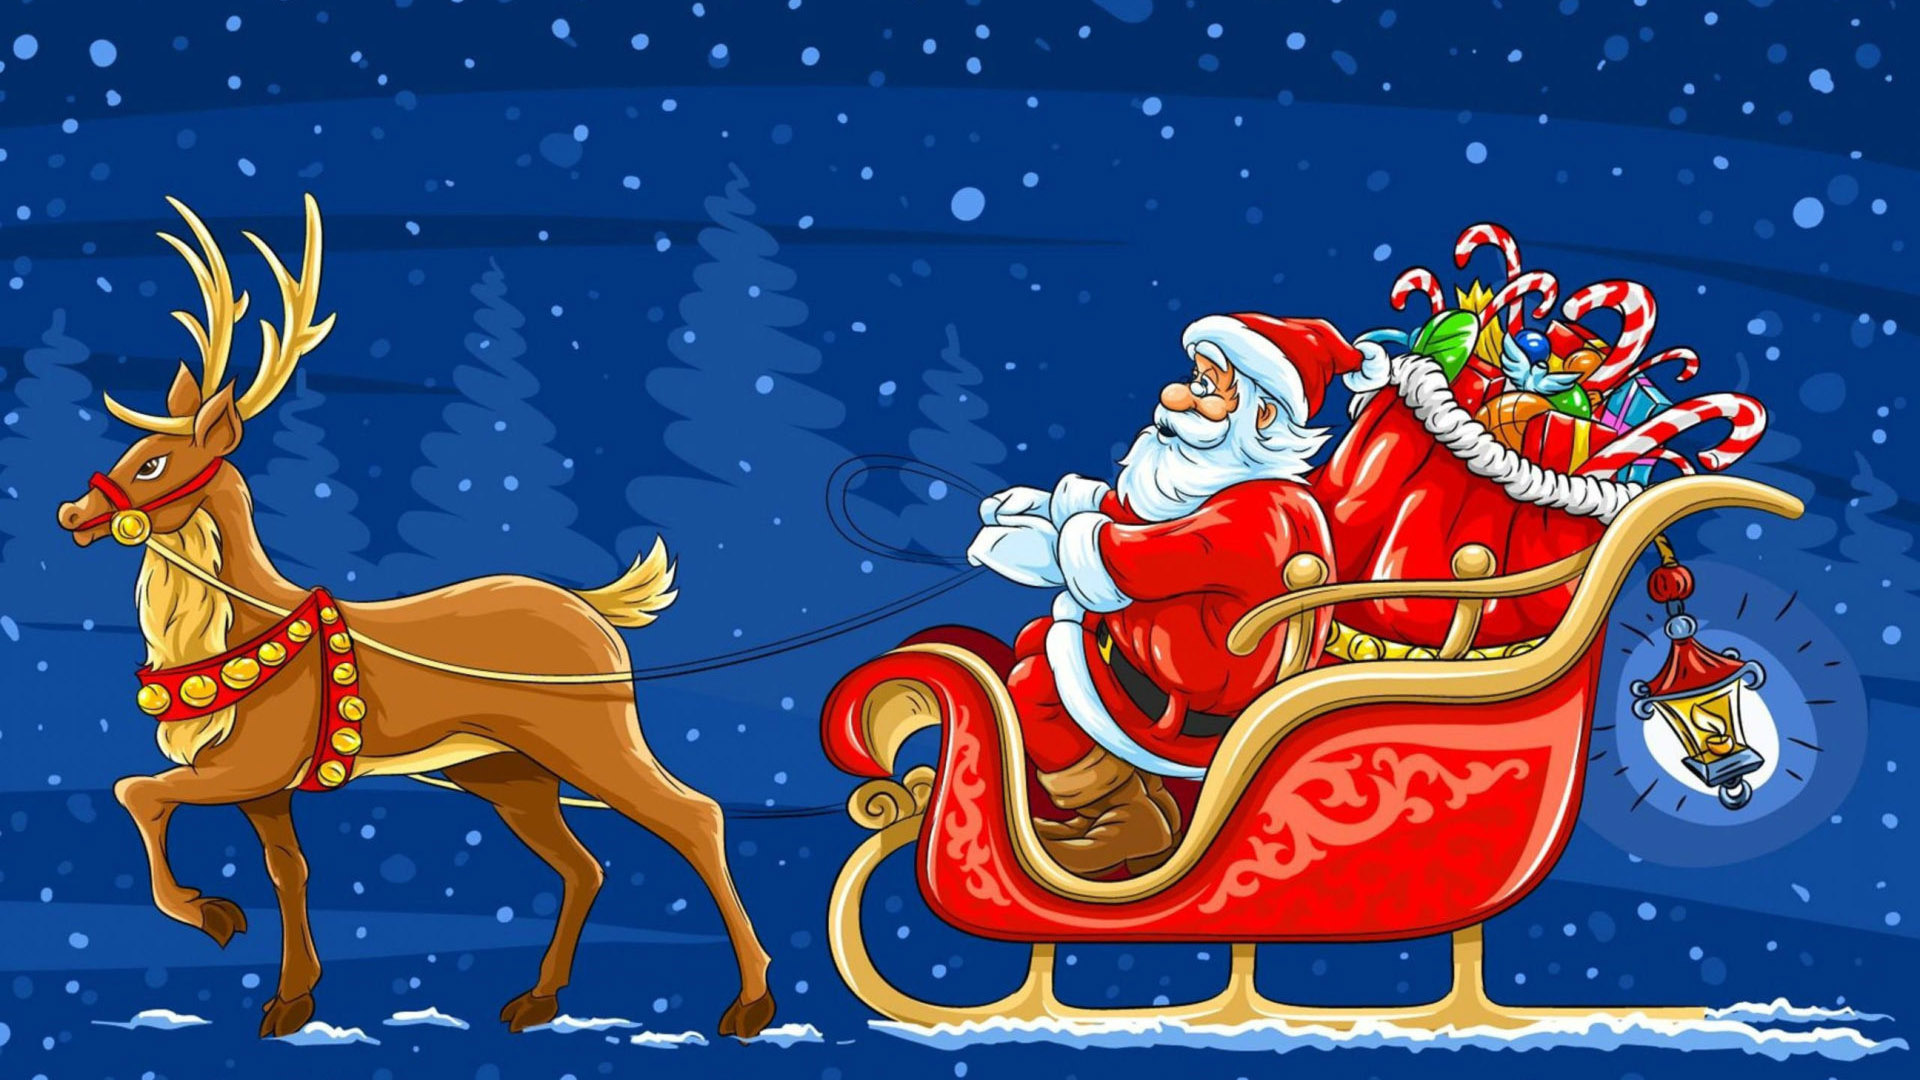 Santa Claus On Sled With Gifts In Blue Sky Wallpaper 2K Santa Claus